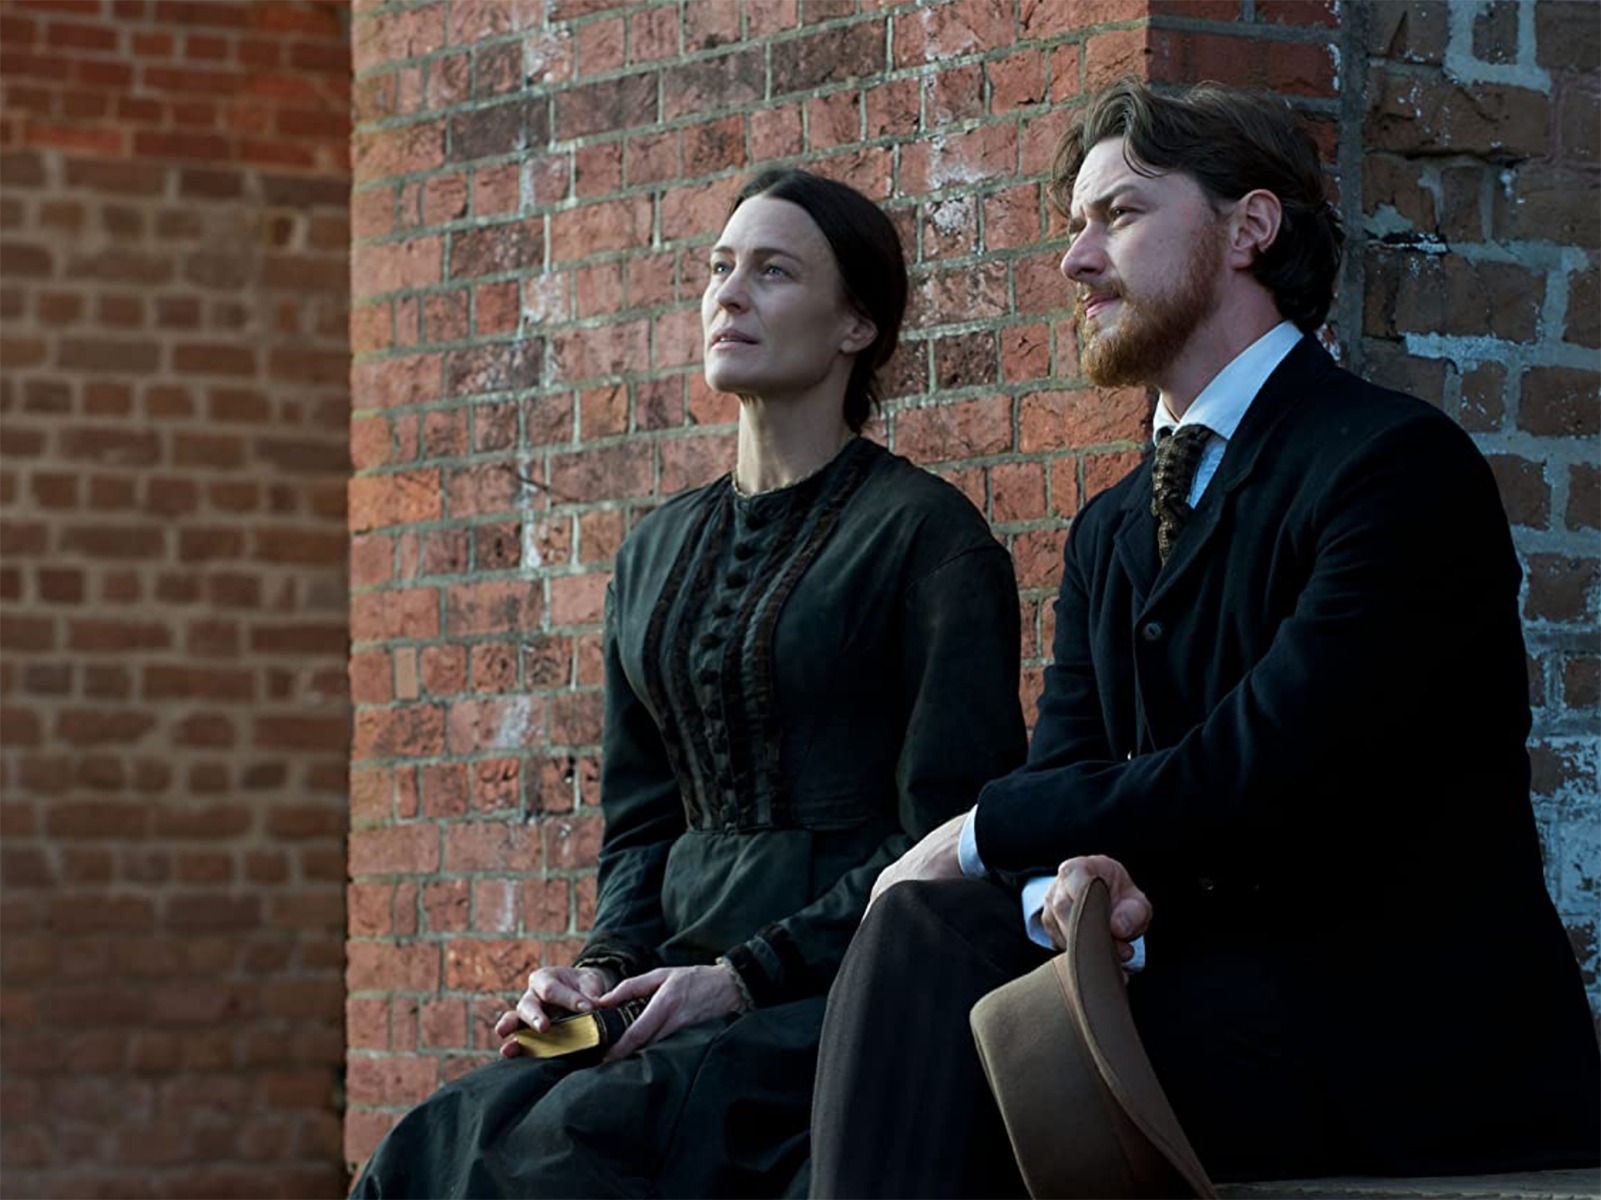 Robin Wright and James McAvoy in “The Conspirator” (2010)